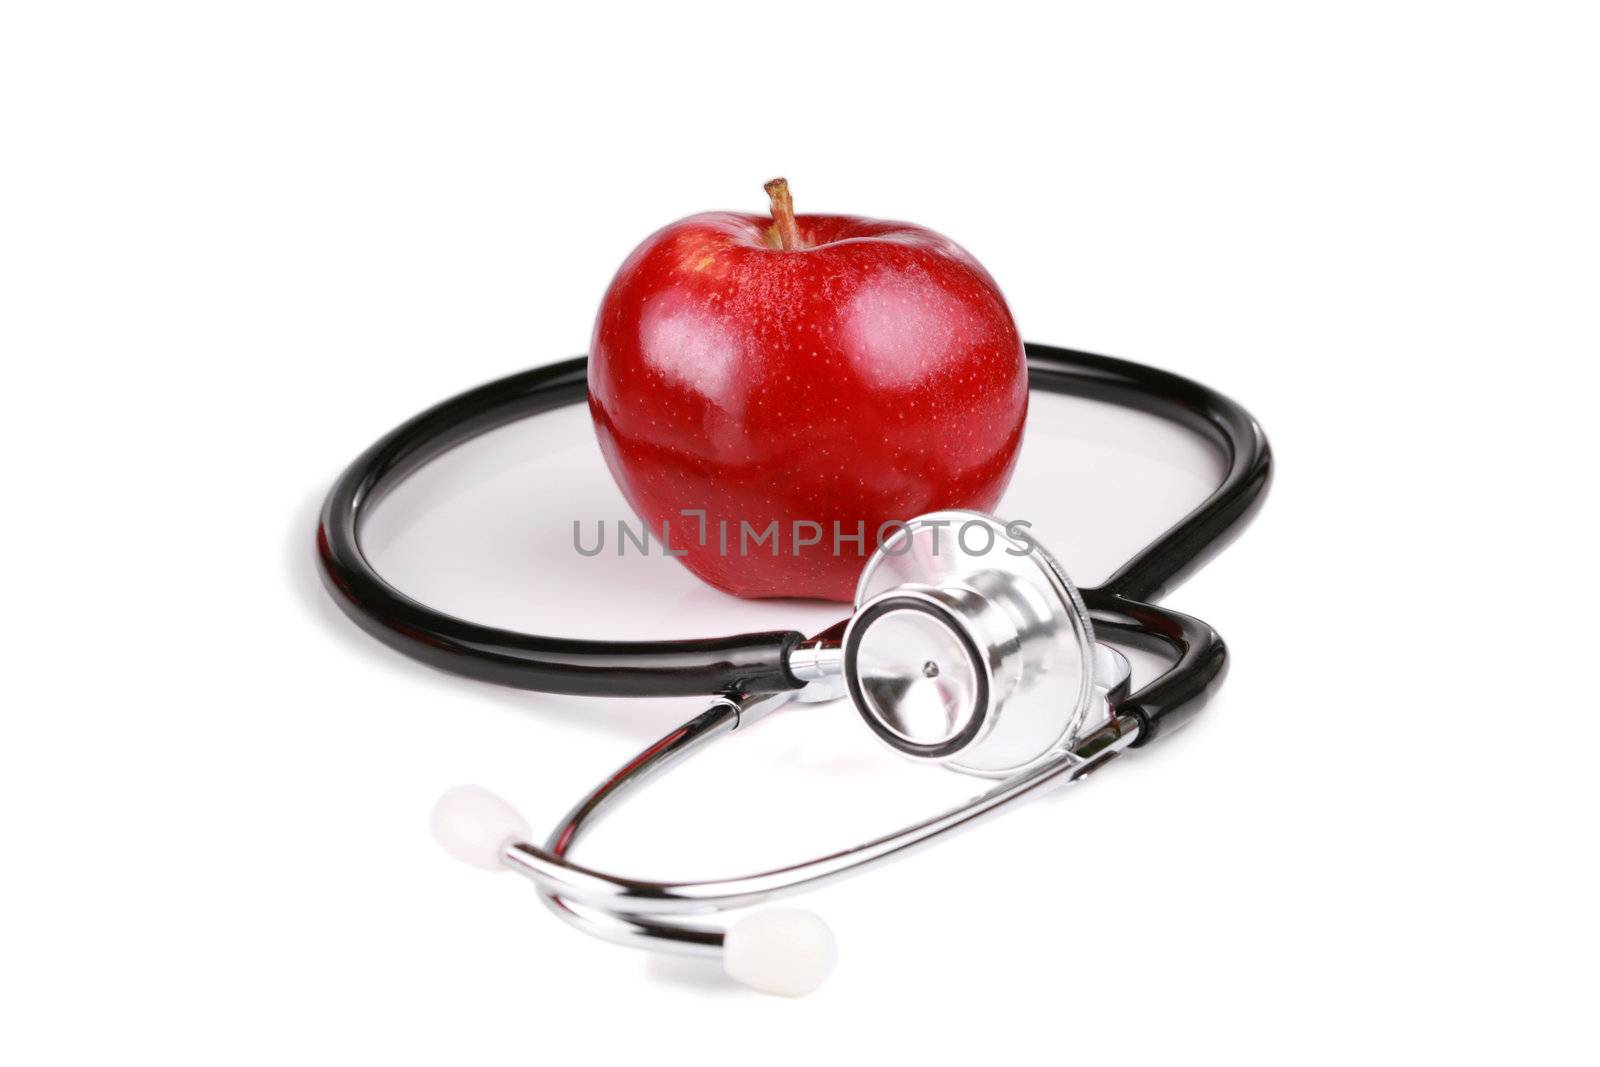 red gala apple with stethoscope by jarenwicklund